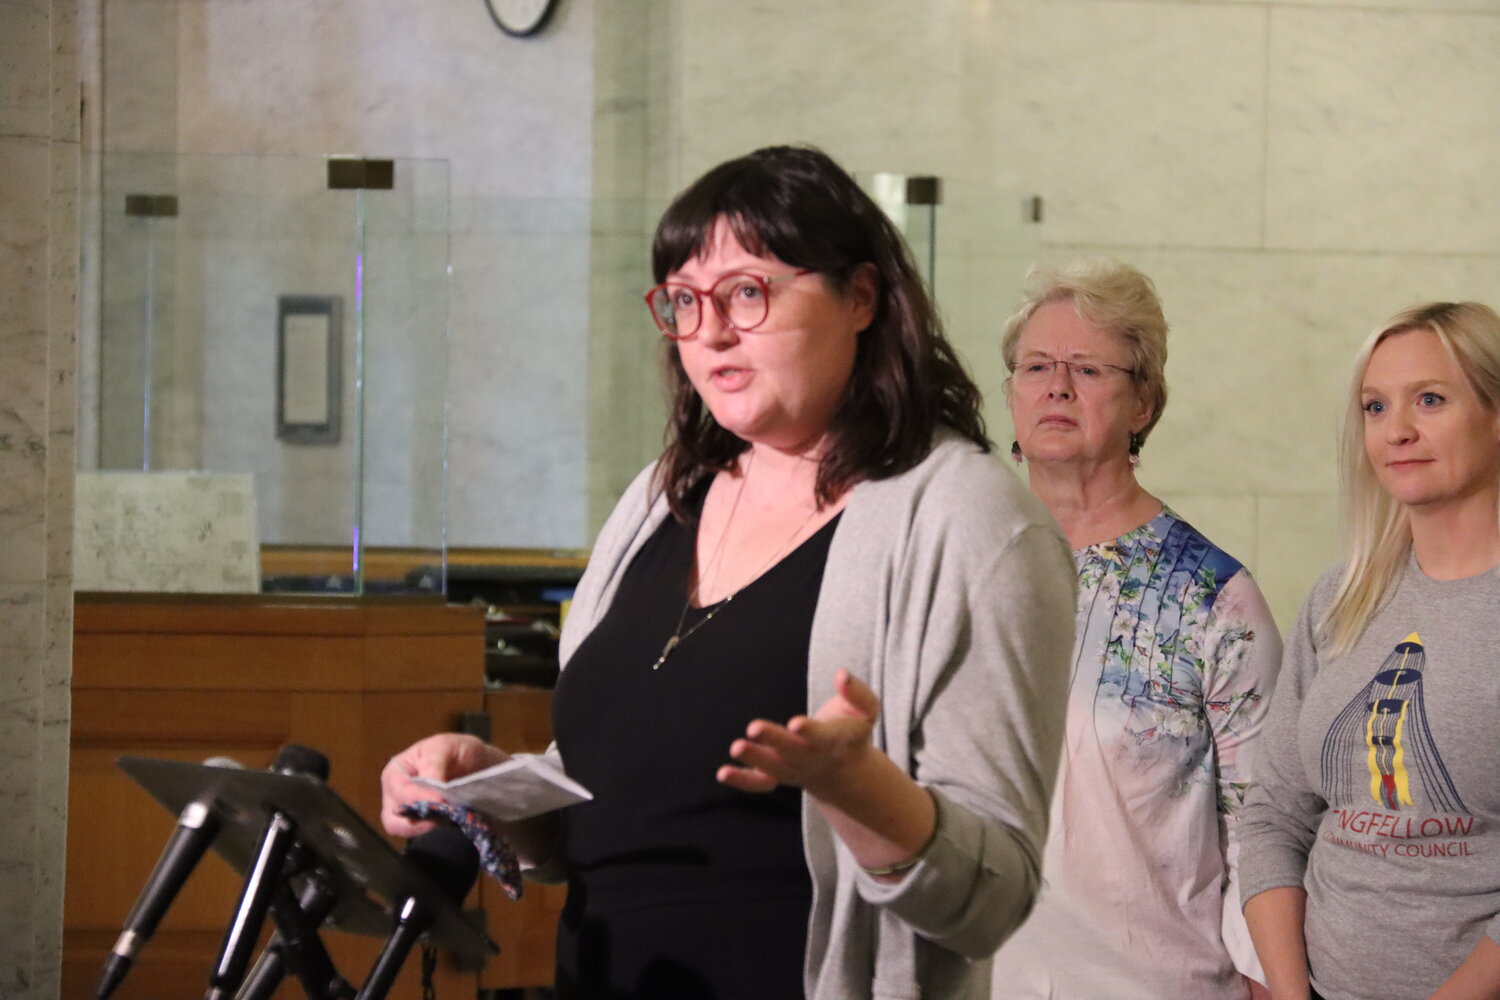 Standish-Ericsson Neighborhood Association staff member Kate Gens speaks at the Third Precinct press conference on May 16, 2023 at Minneapolis City Hall. "We want our residents and businesses voices to be heard," said Gens, pointing out that it will build trust and justice.